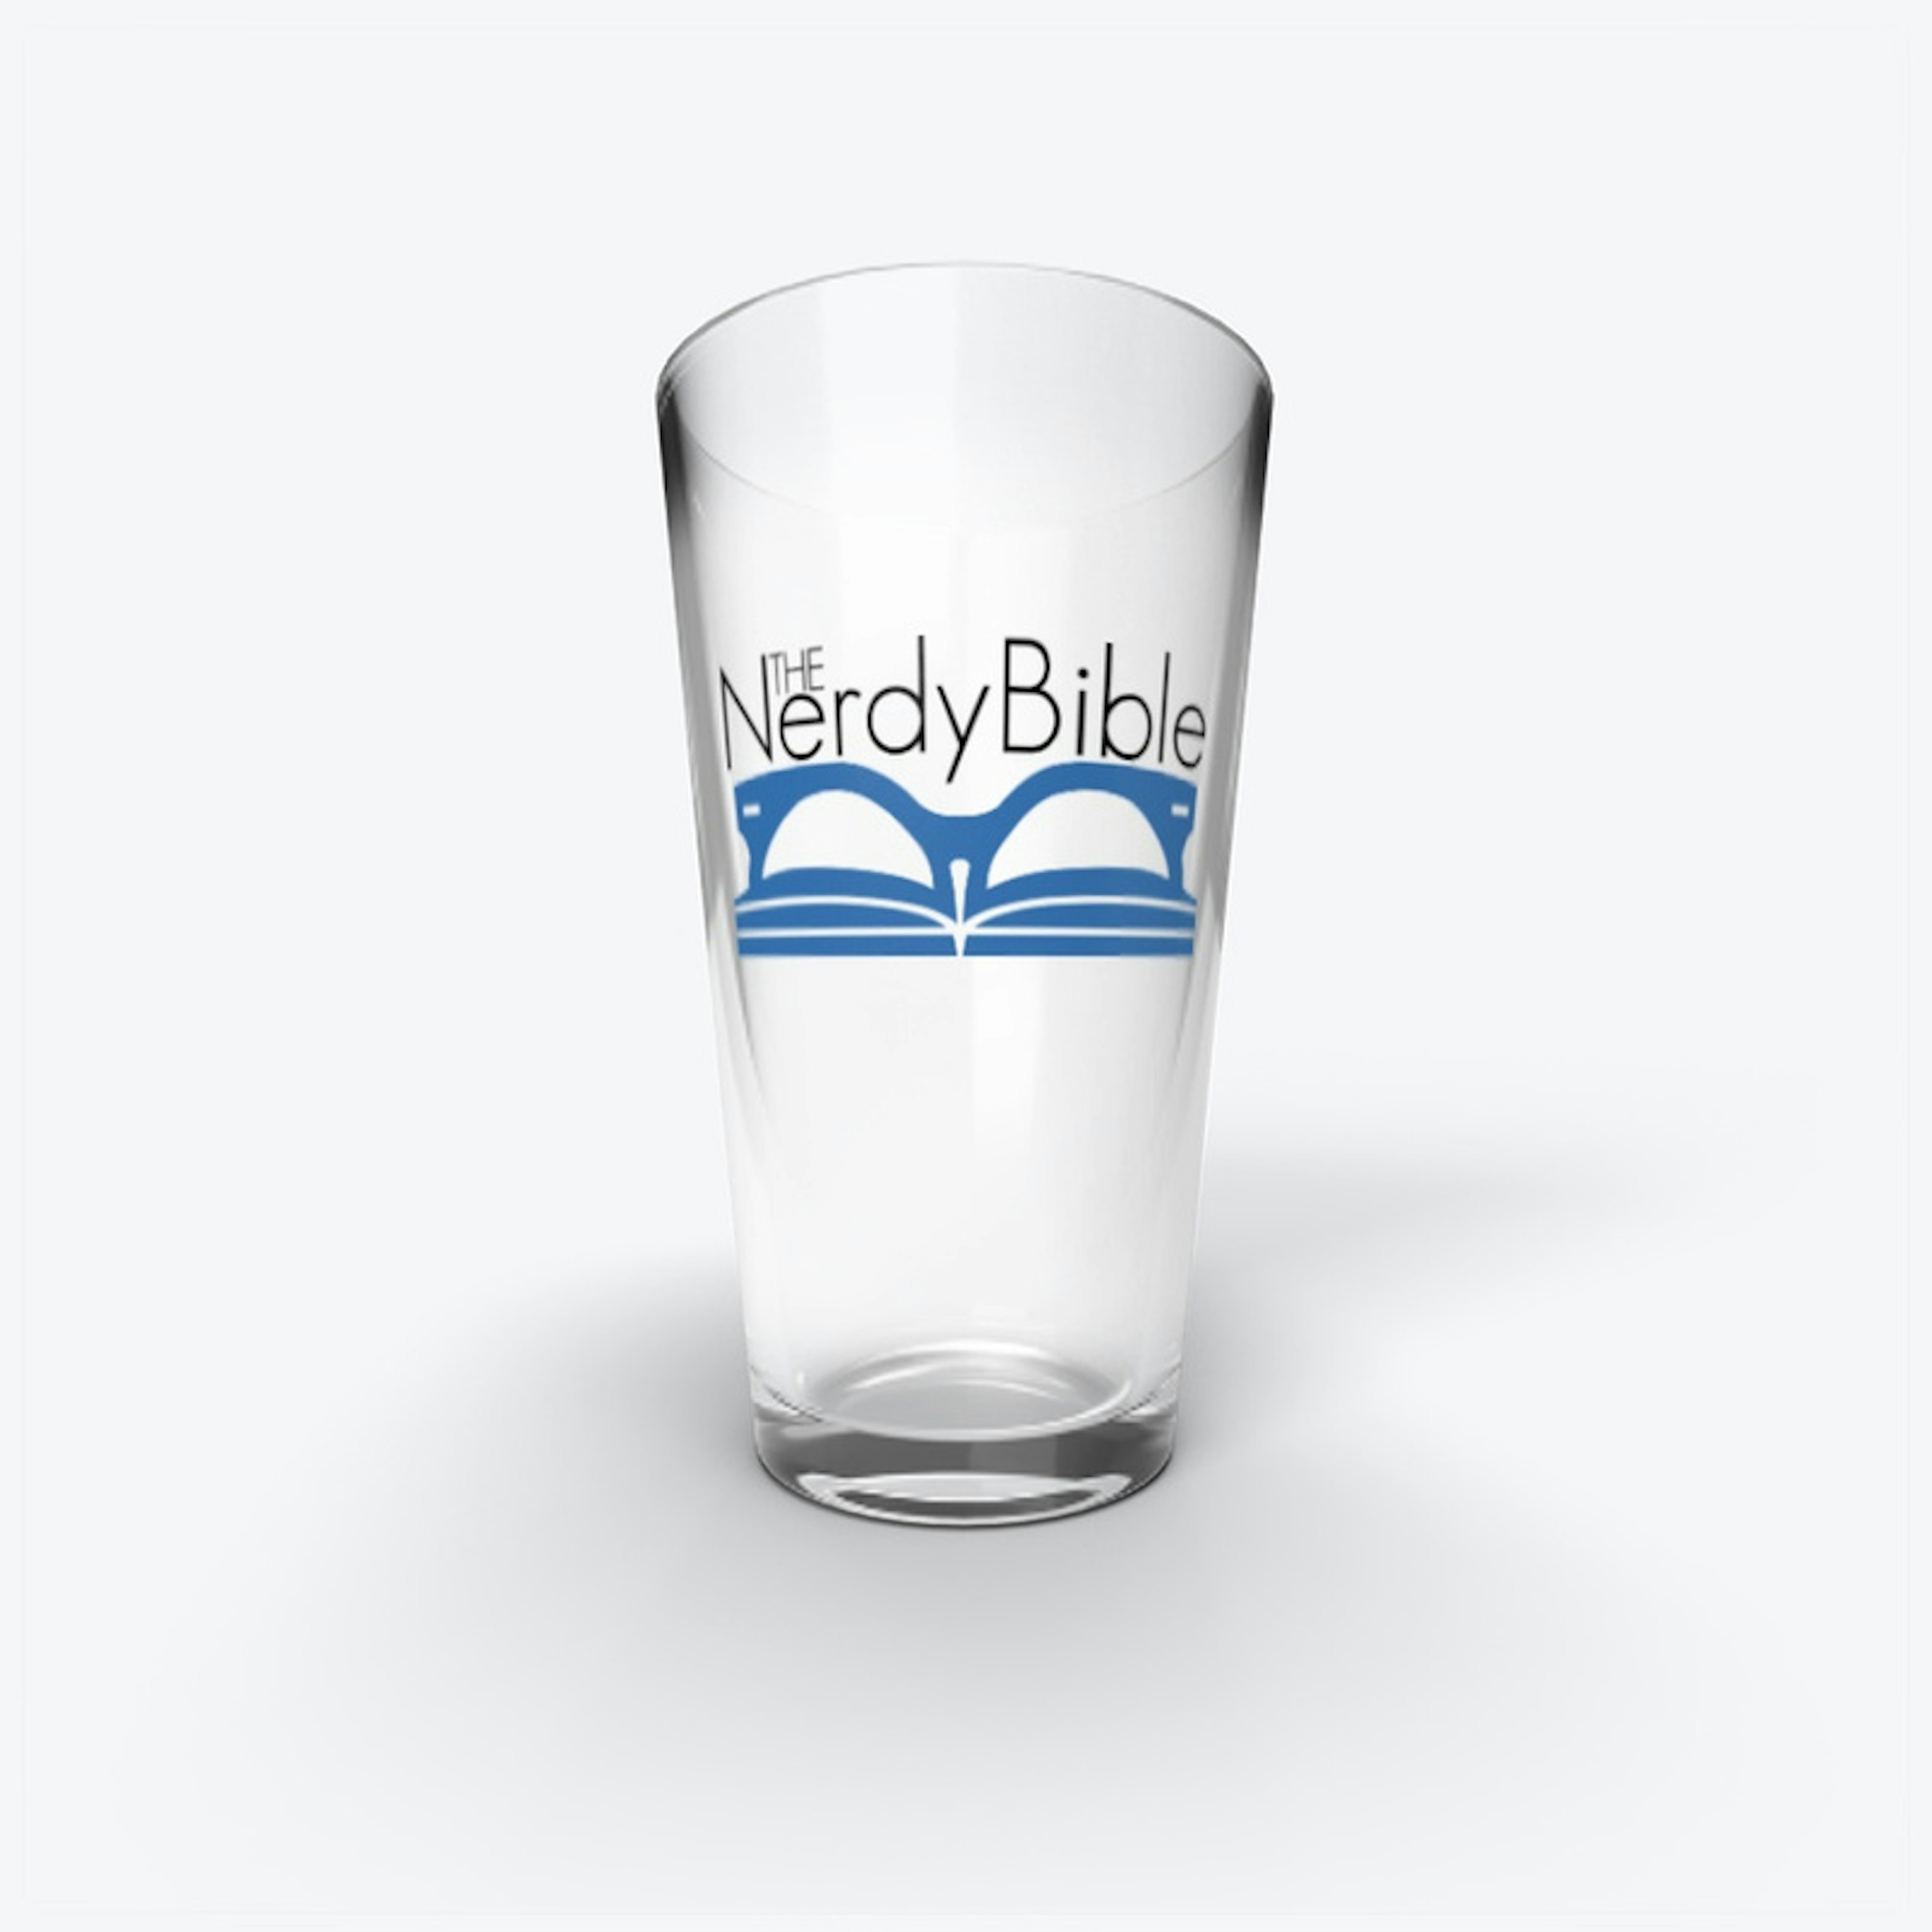 The Nerdy bible - Glass Cup